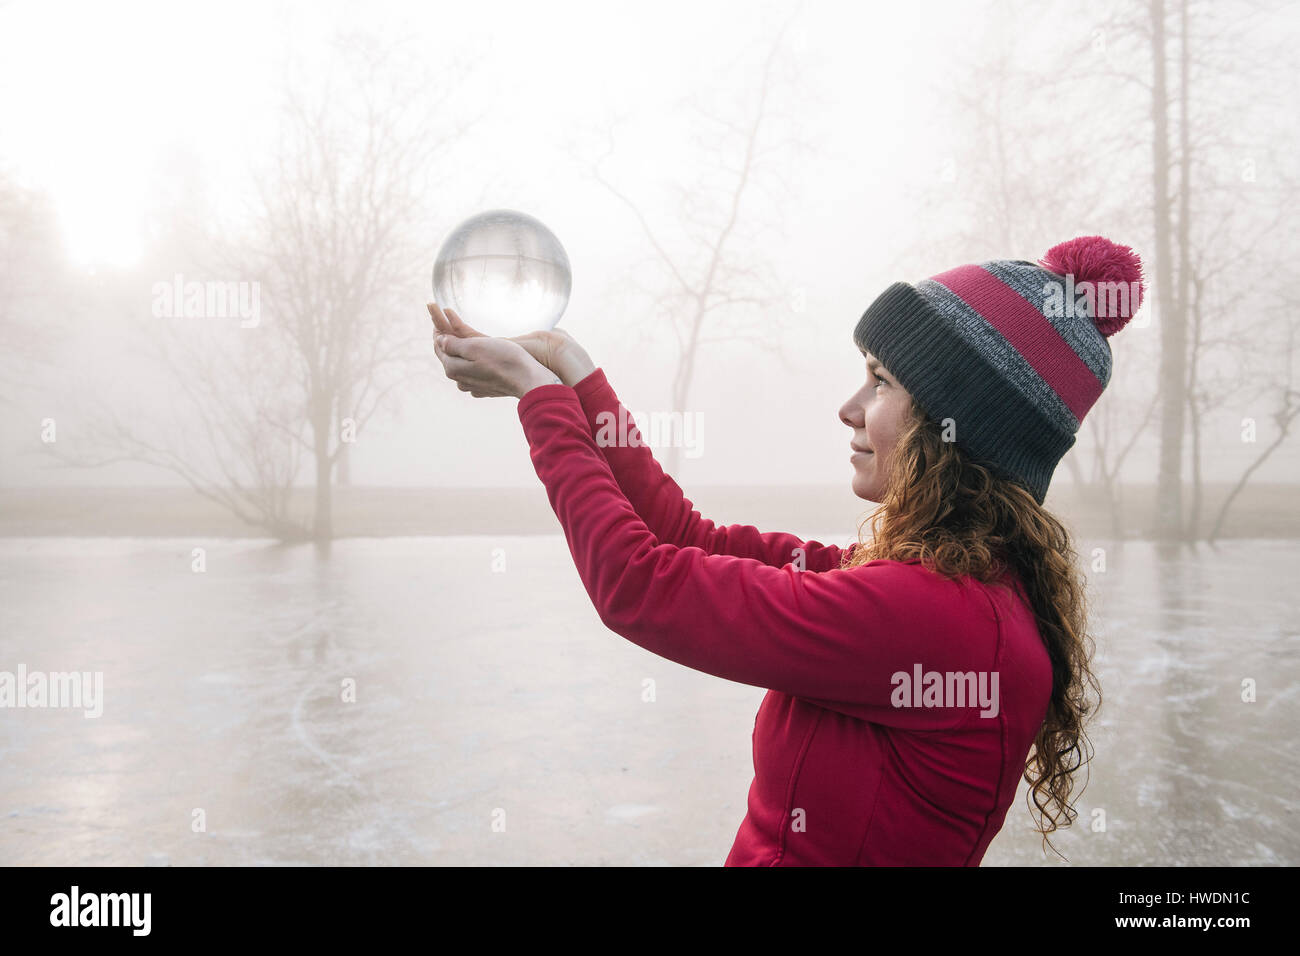 Woman holding up crystal ball on frozen lake Stock Photo